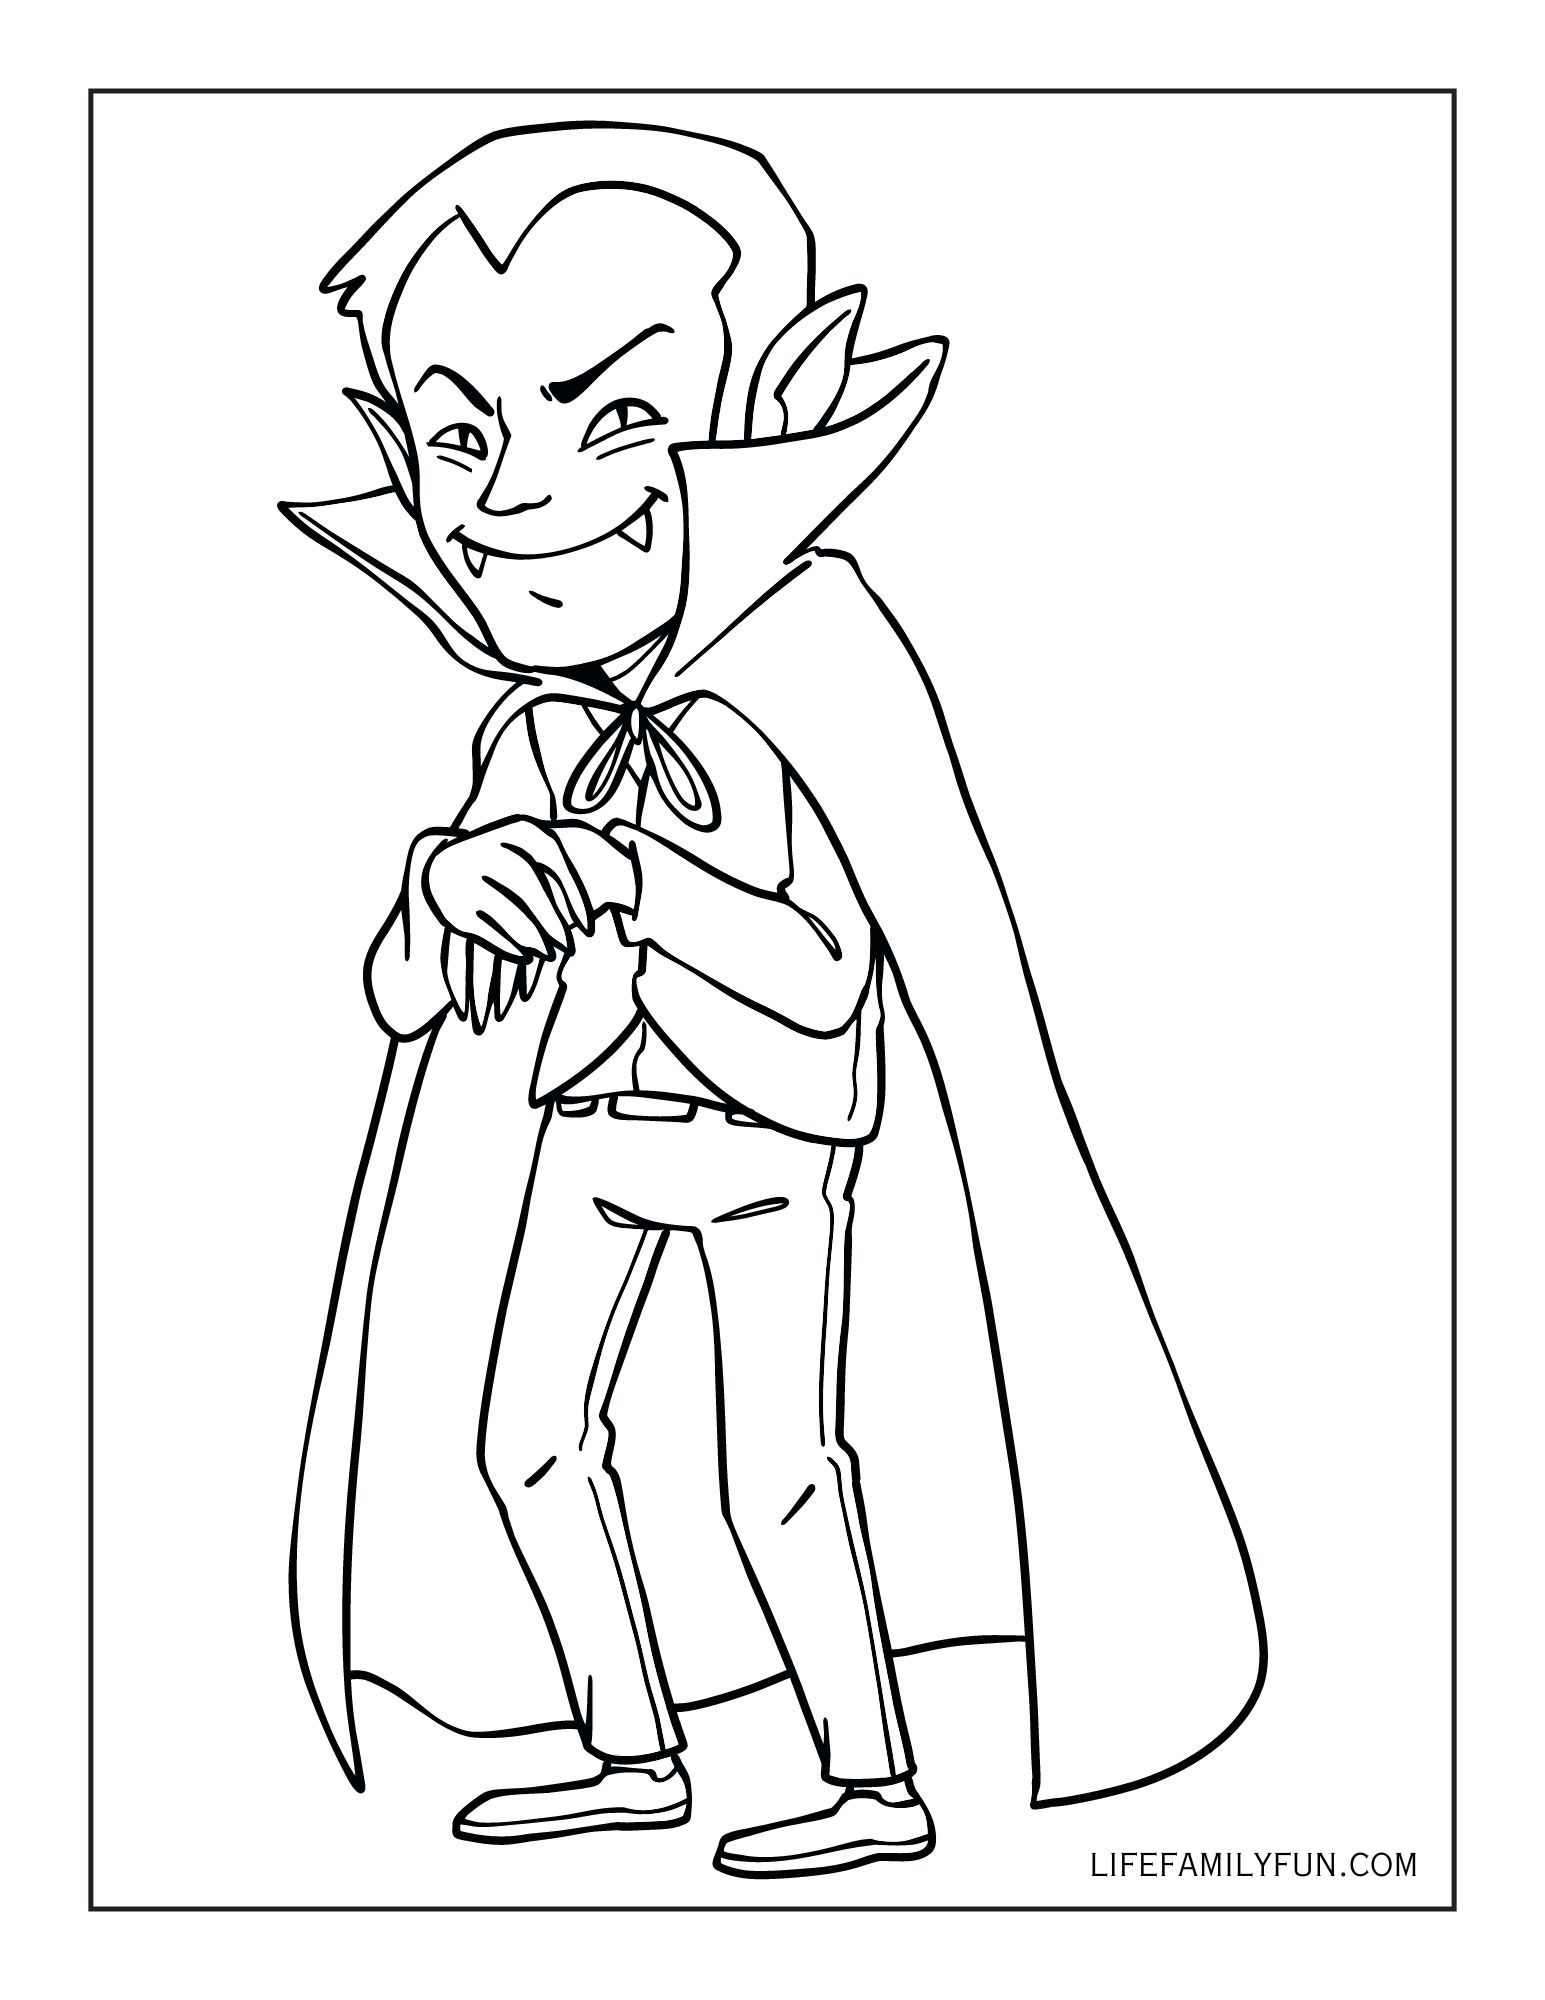 dracula halloween coloring page